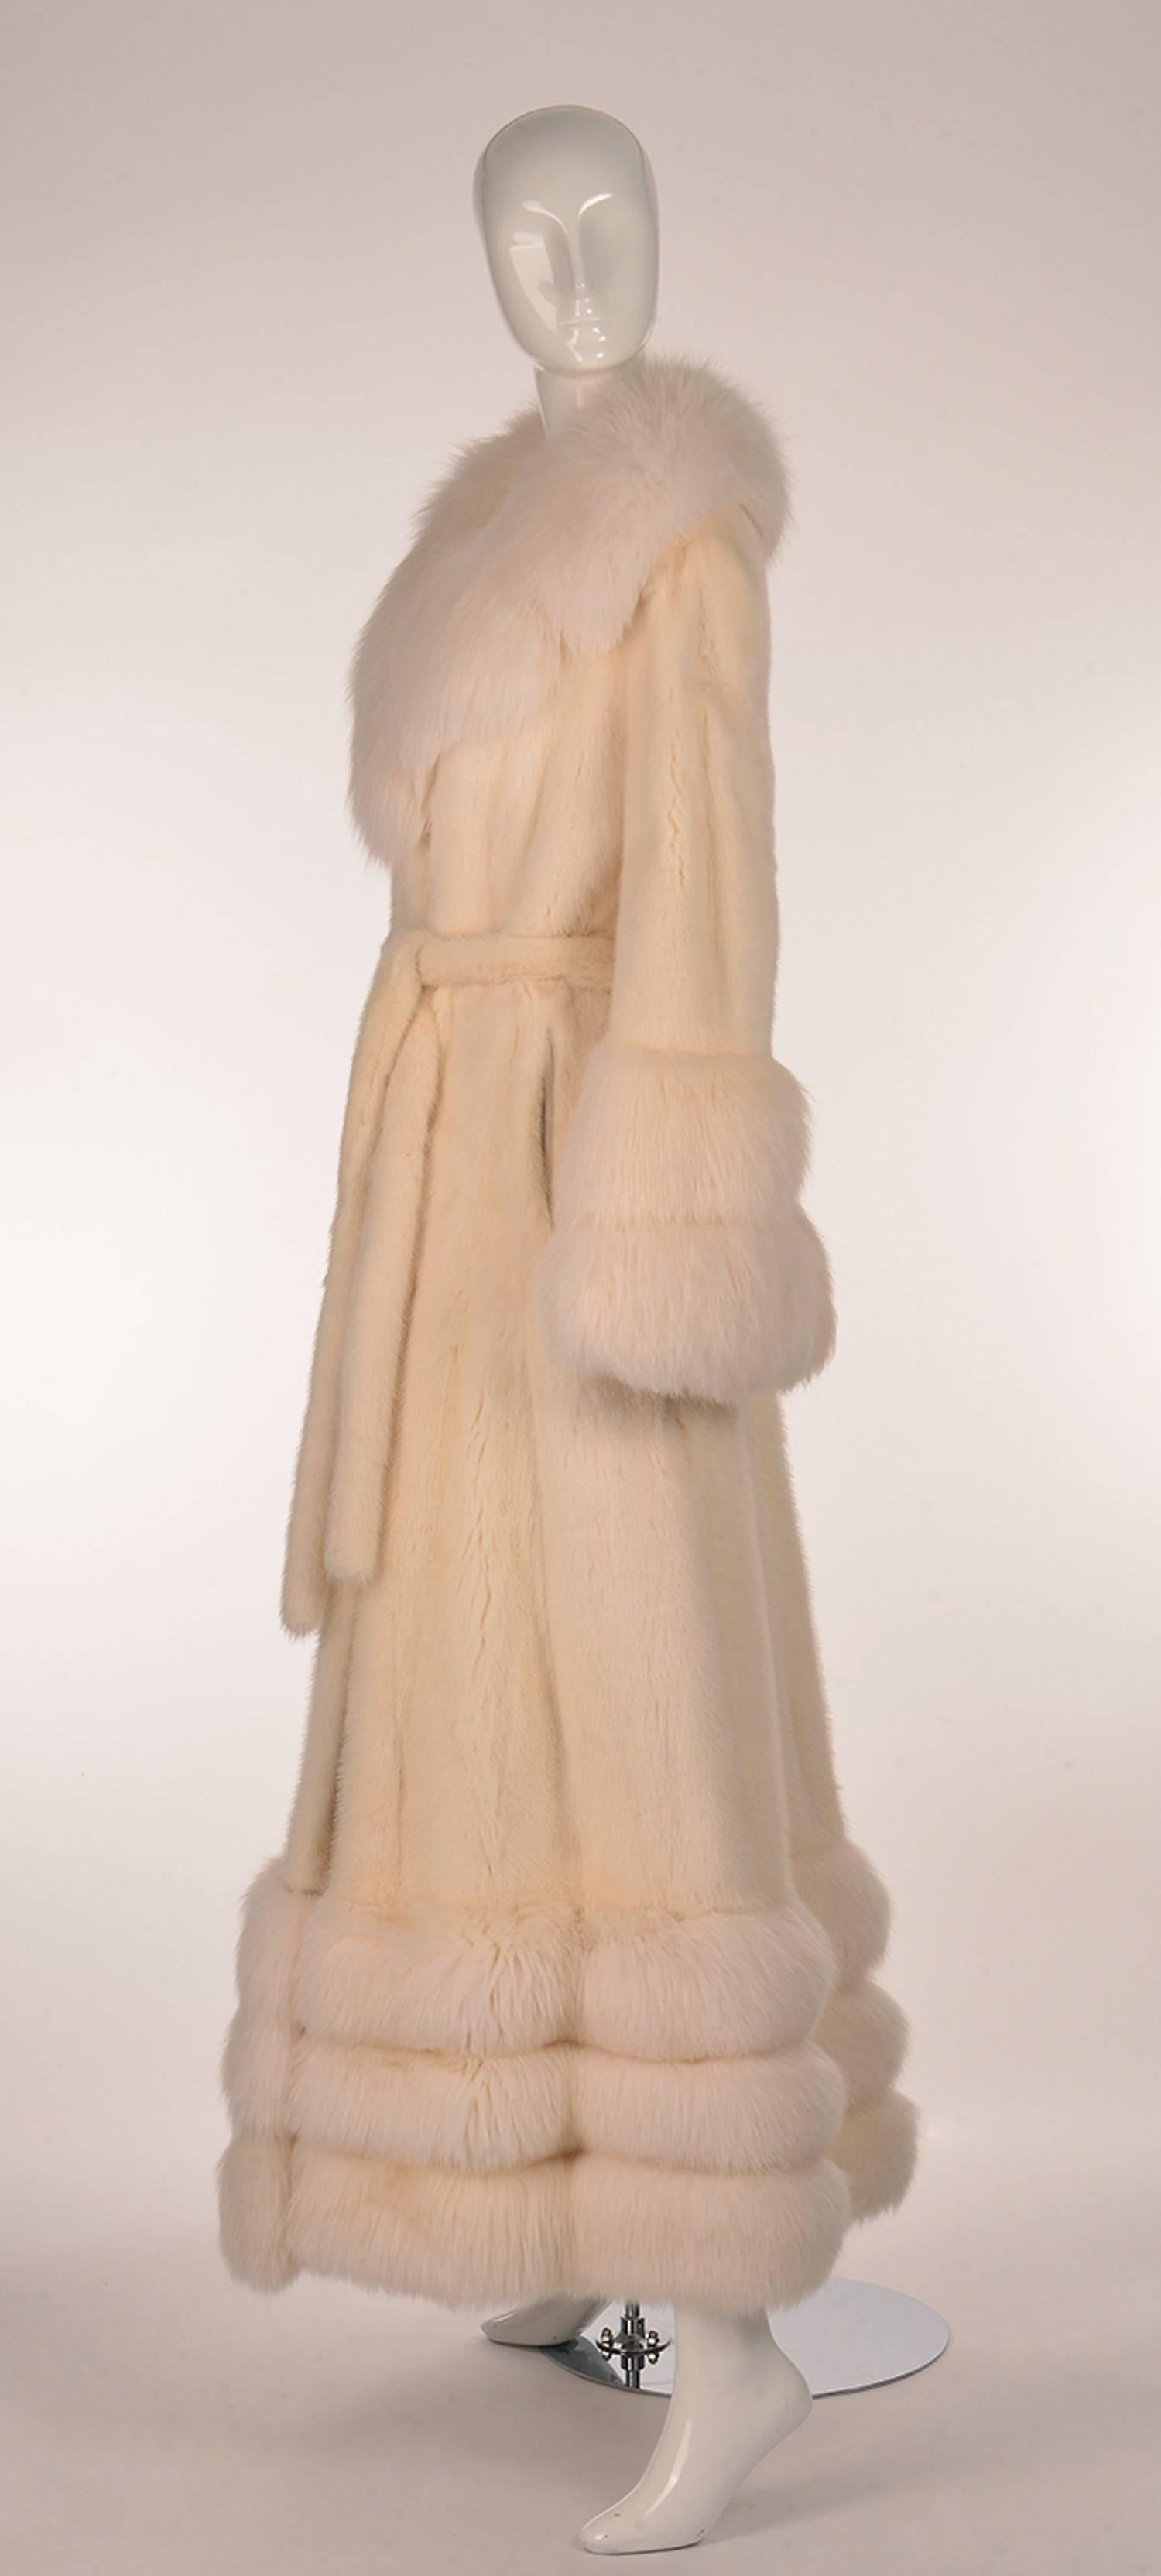 
This spectacular coat is floor length and contains both mink and rabbit fur. The coat is primarily white mink, and is accented with white angora rabbit fur in the collar, sleeves, and zip off hem. The coat is fully lined, and features a gorgeous